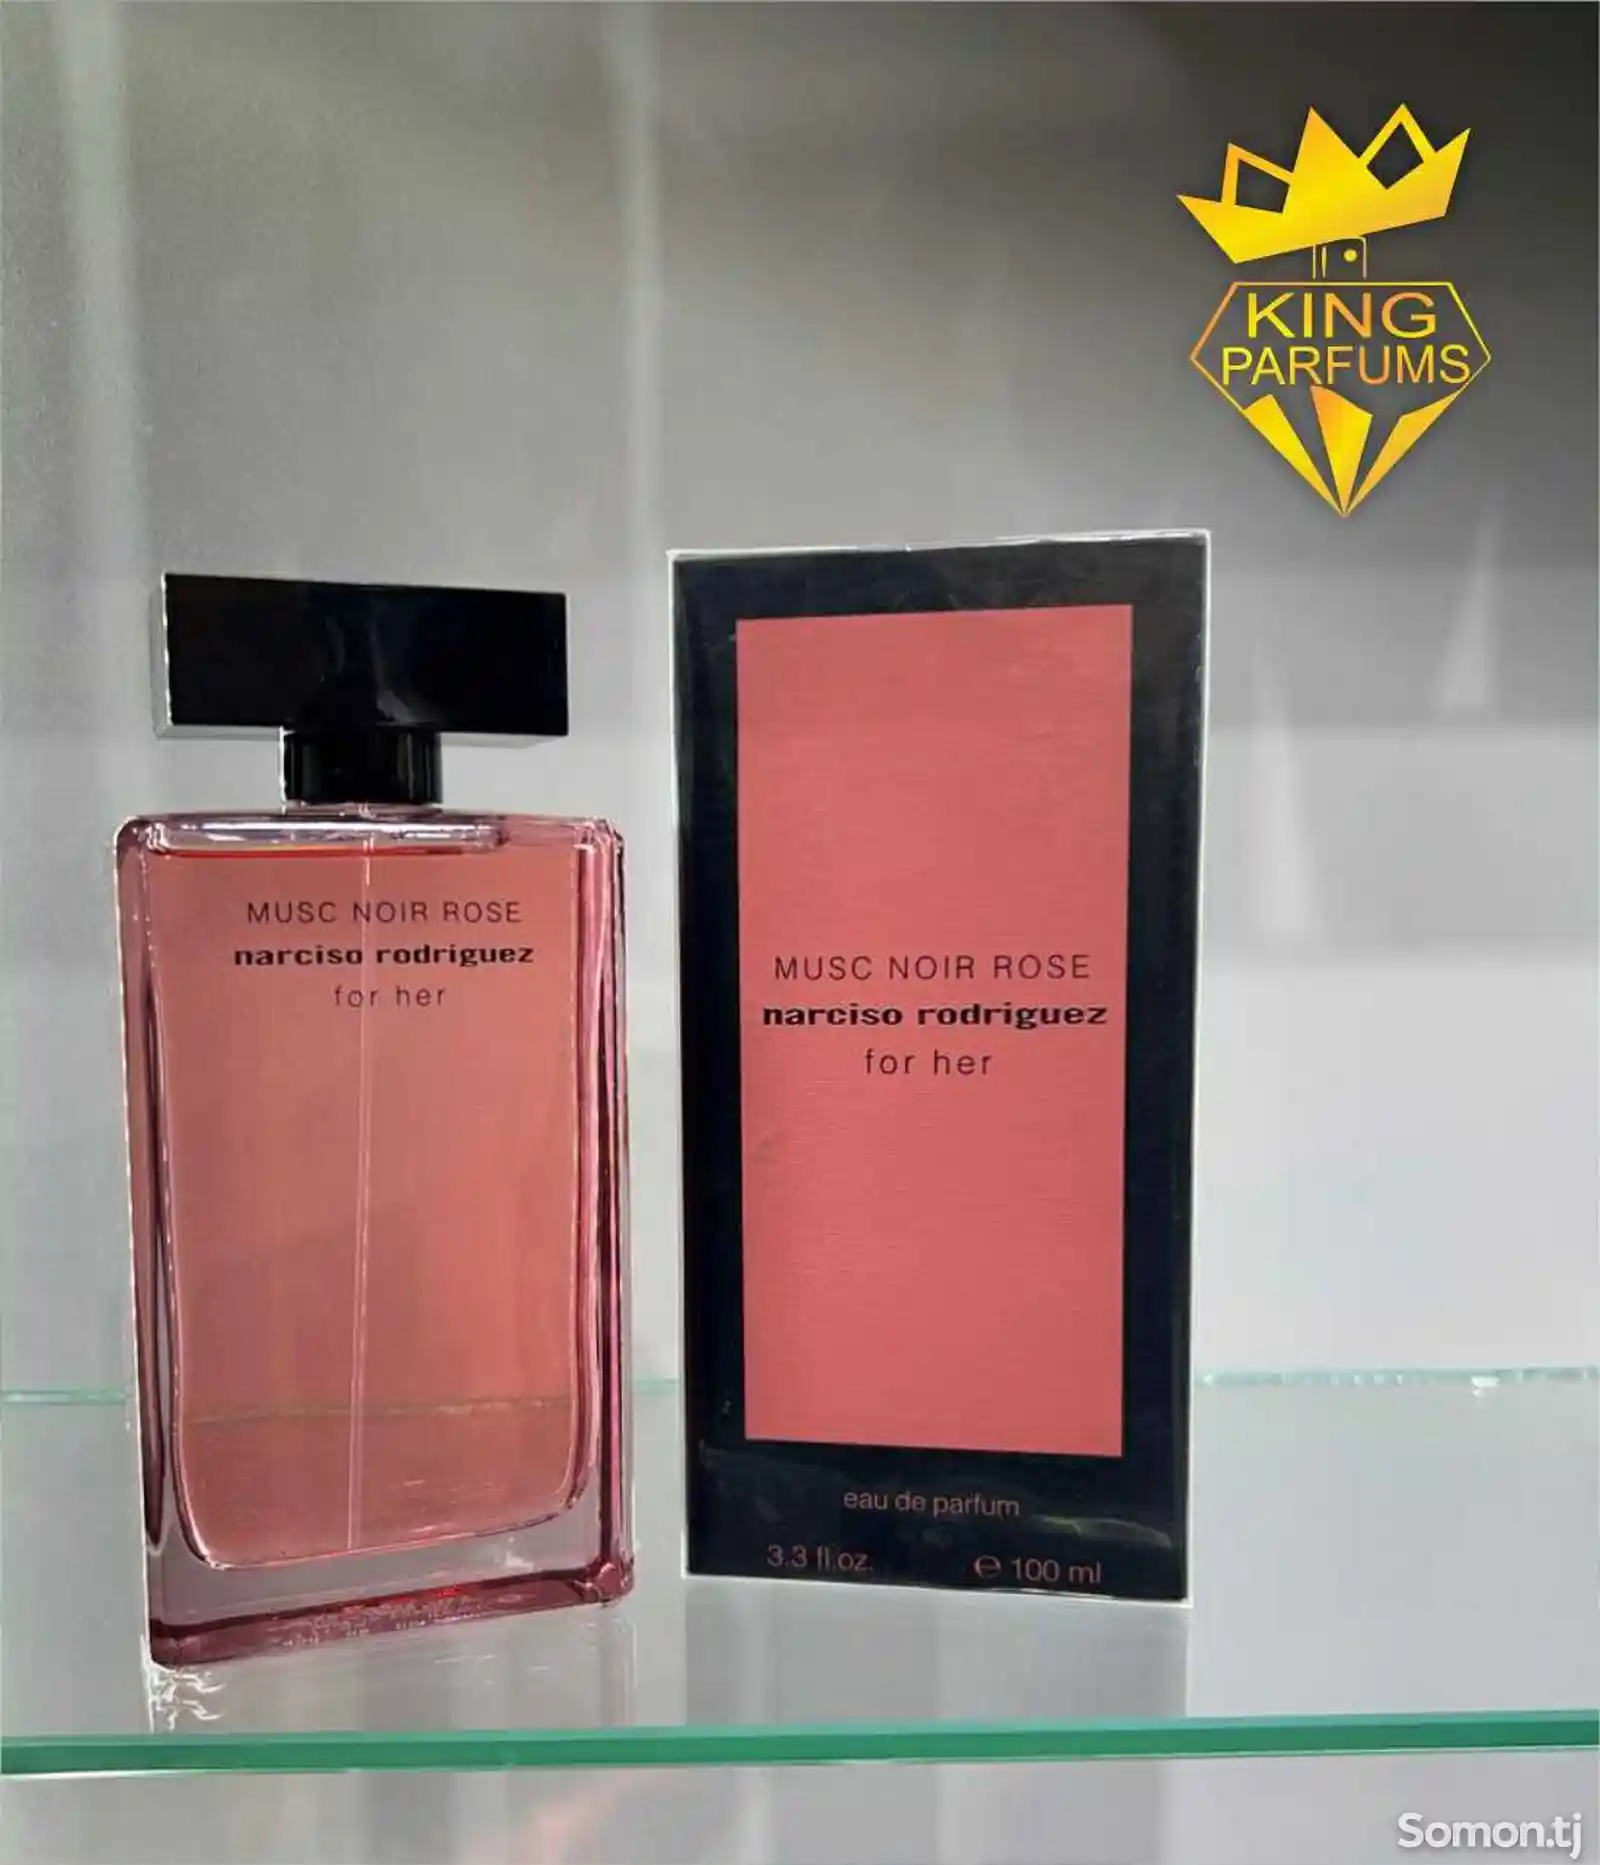 Парфюм Musk noir rose for her narciso rodriguez-3